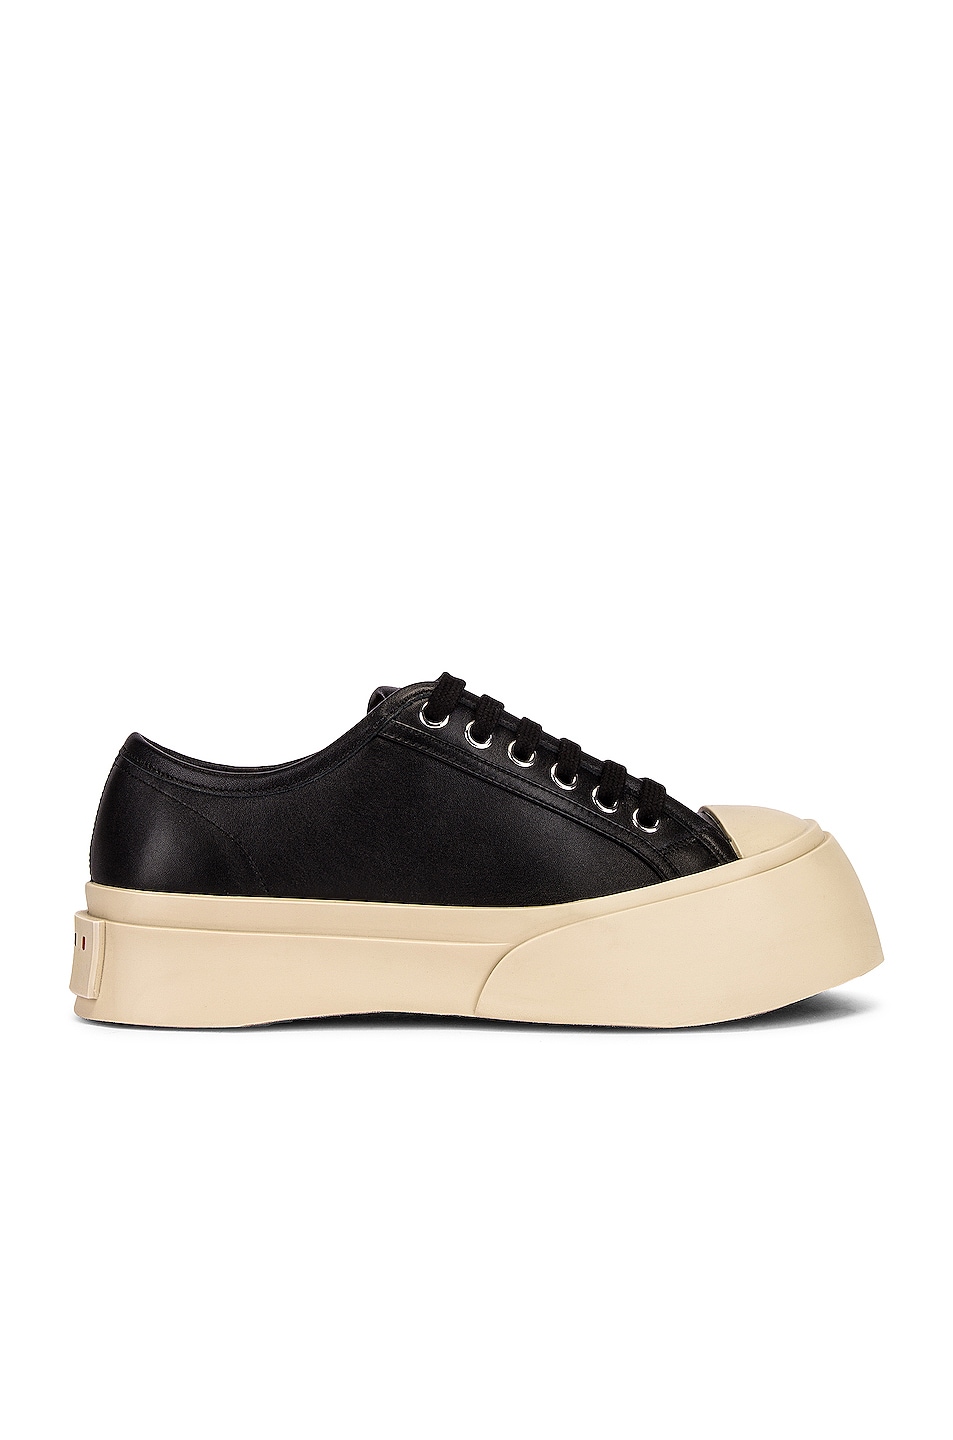 Marni Pablo Lace Up Sneakers in Black | FWRD